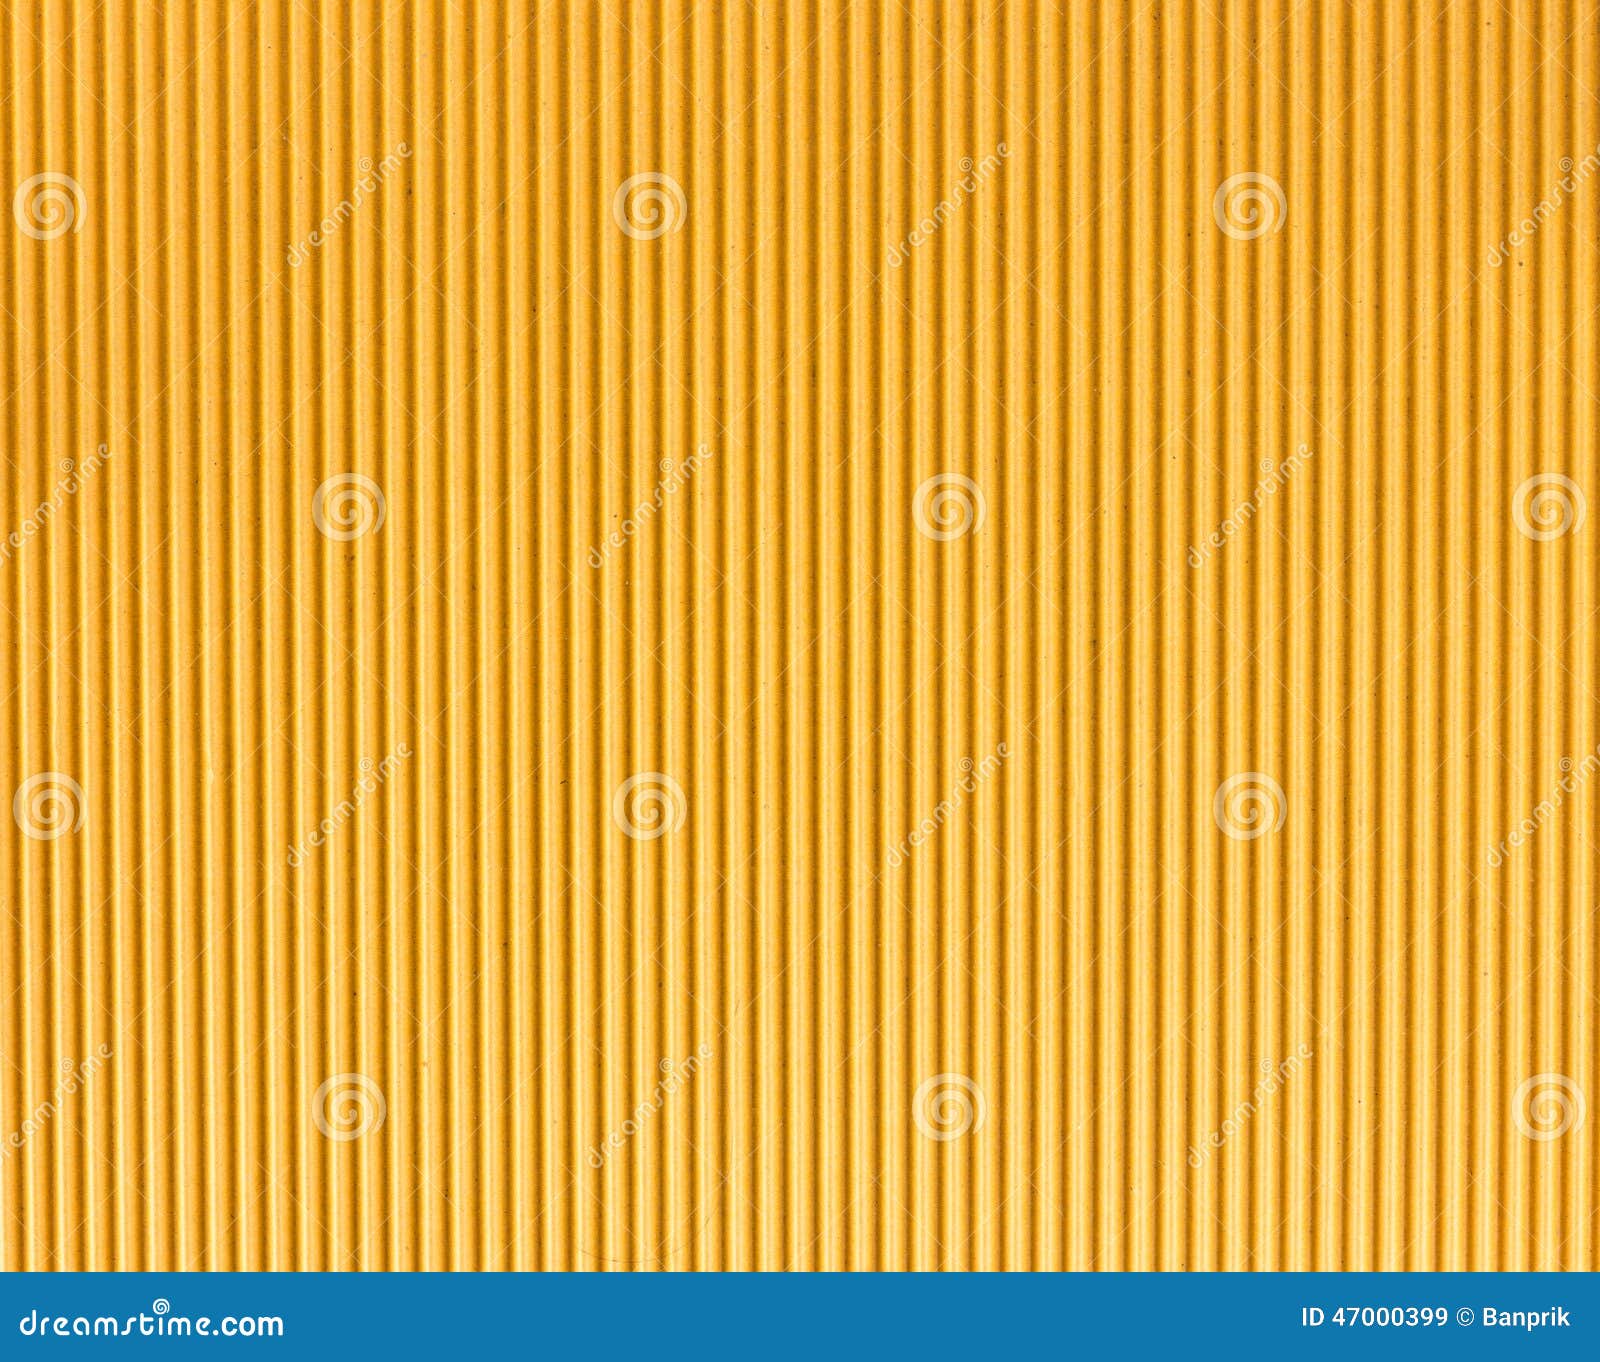 corrugated fiberboard texture as background